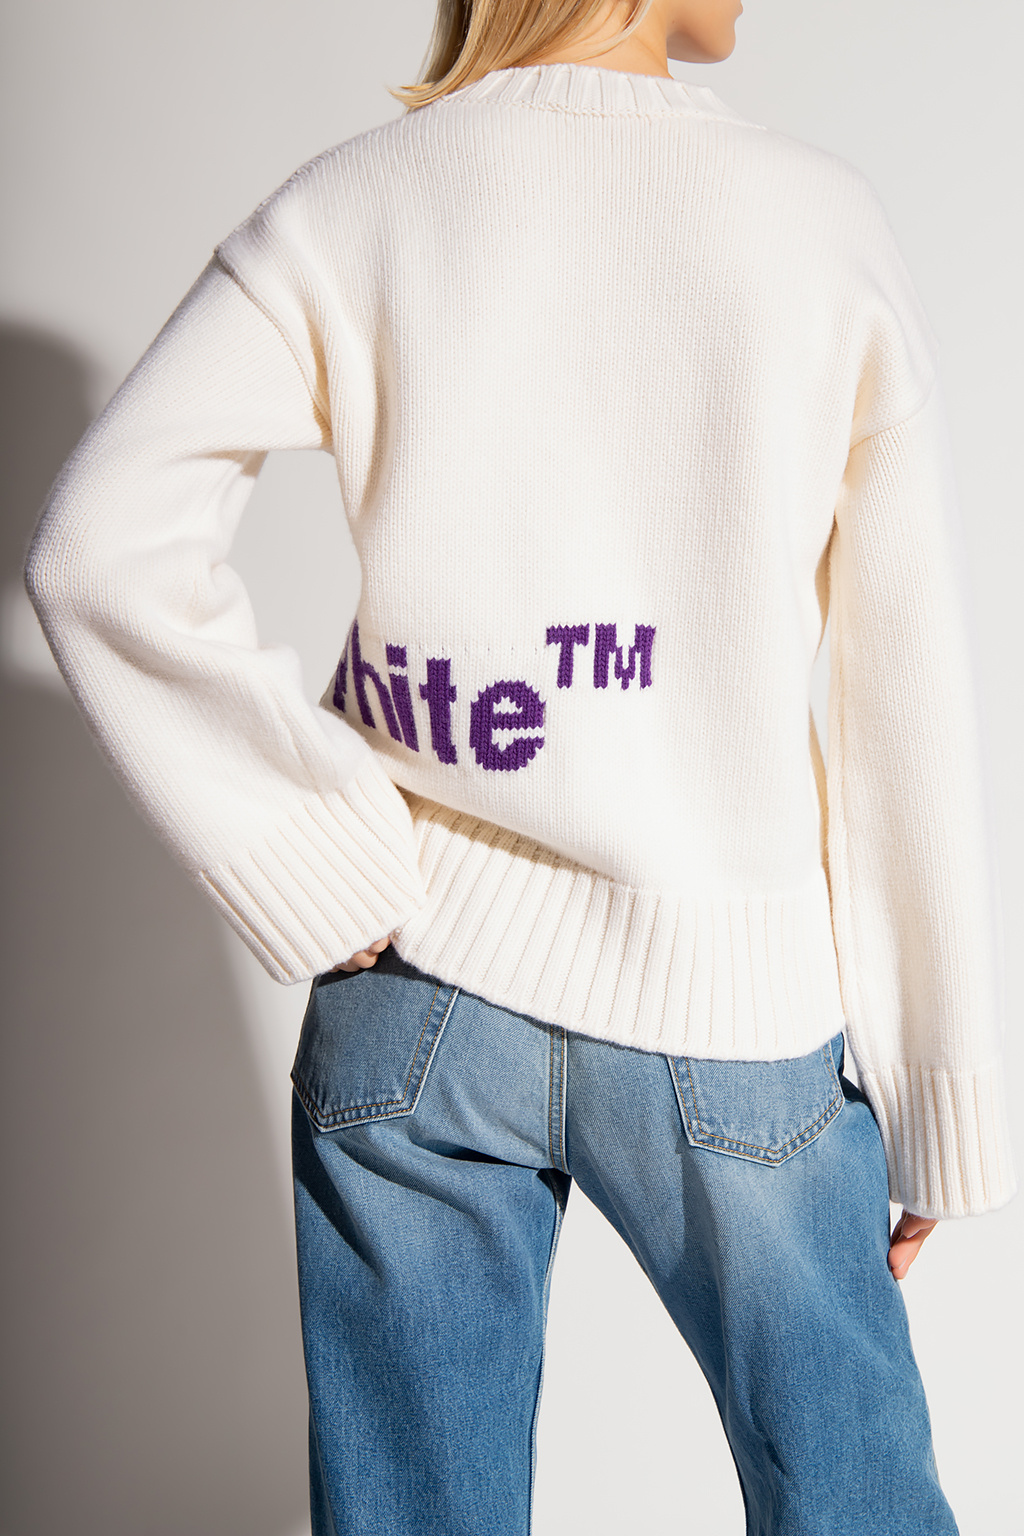 Off-White sweater lightweight with logo